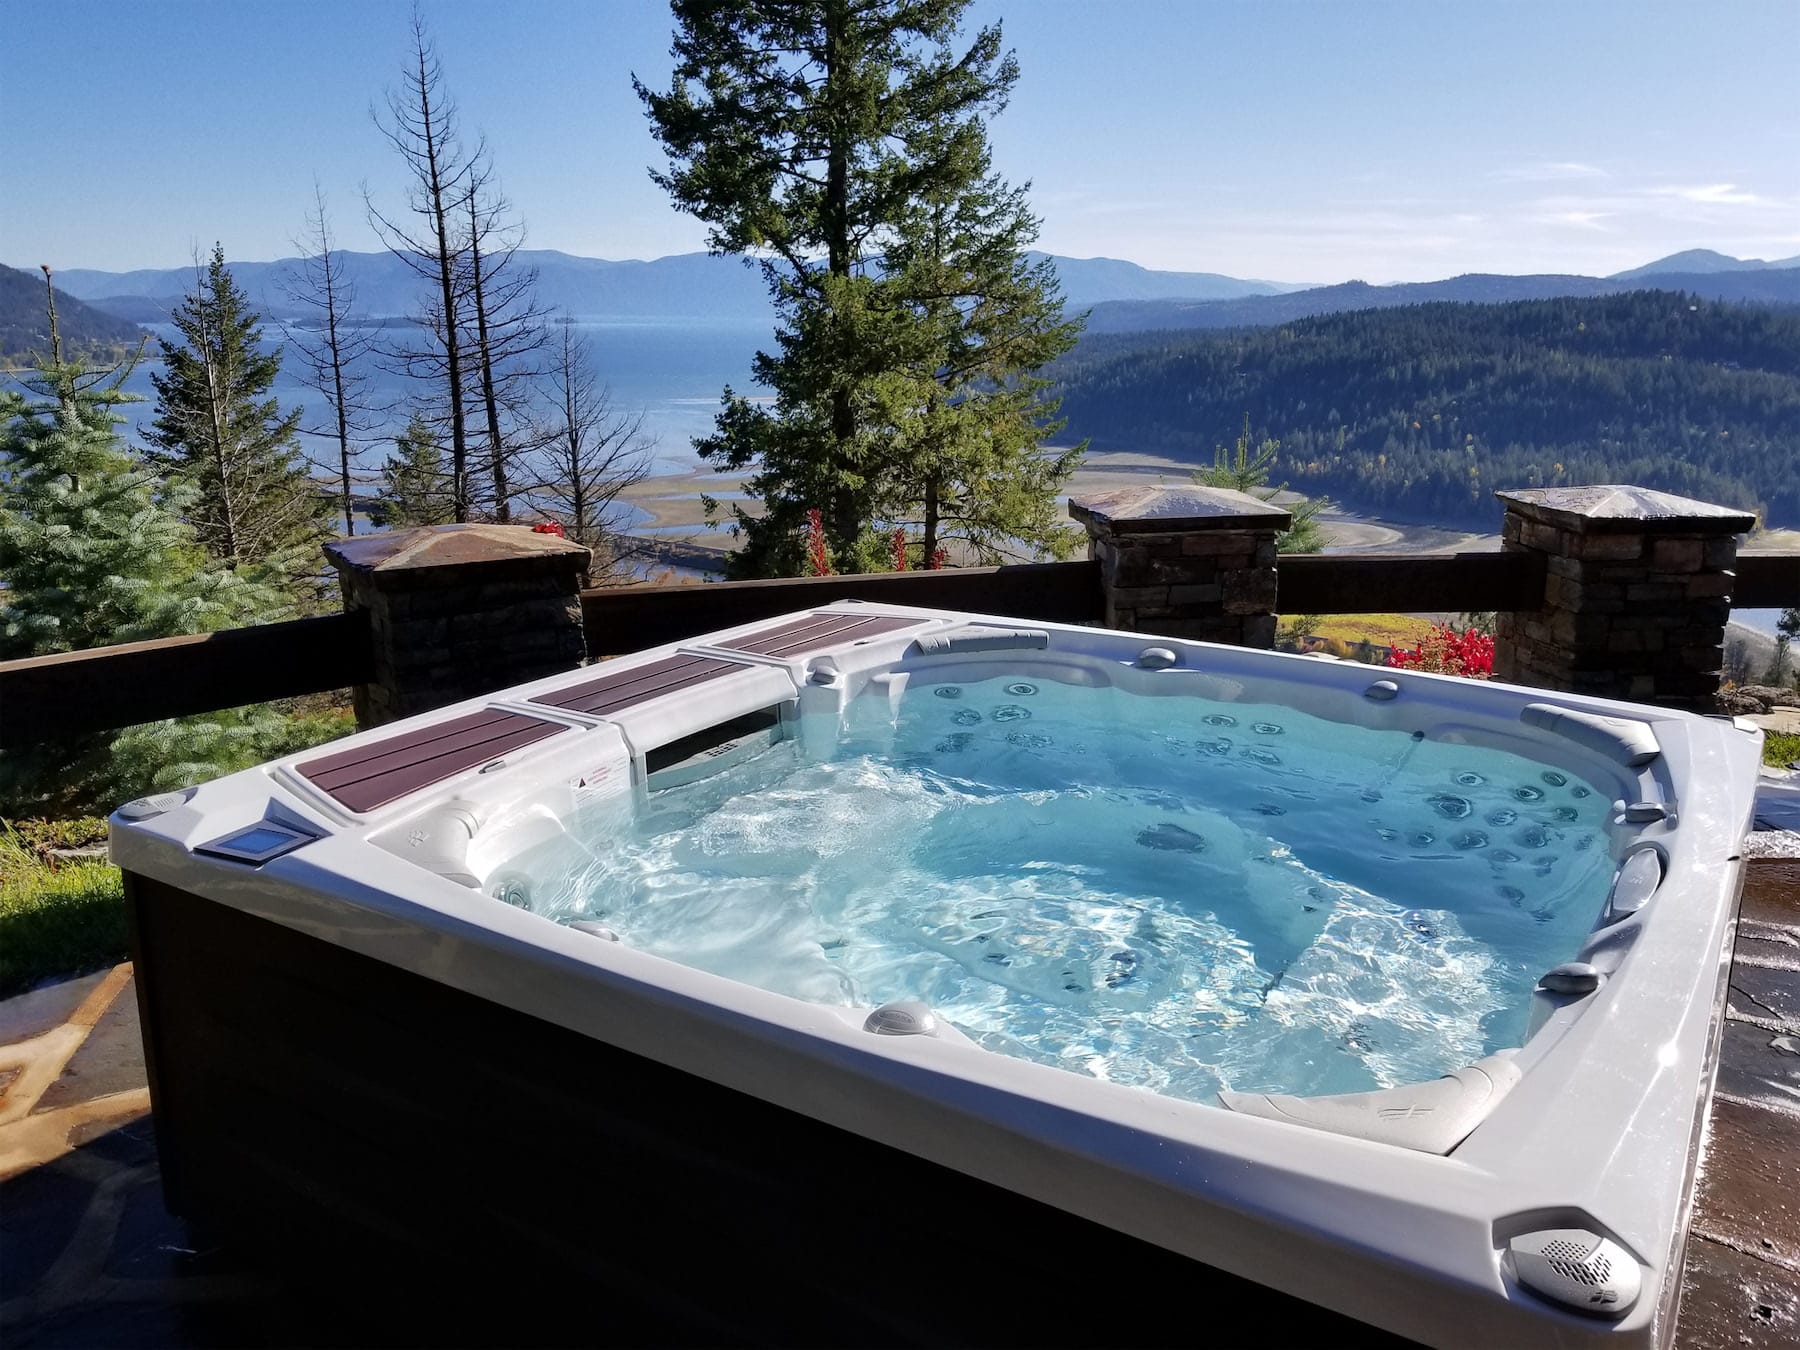 5 Best Hot Tub Exercises You Should Try